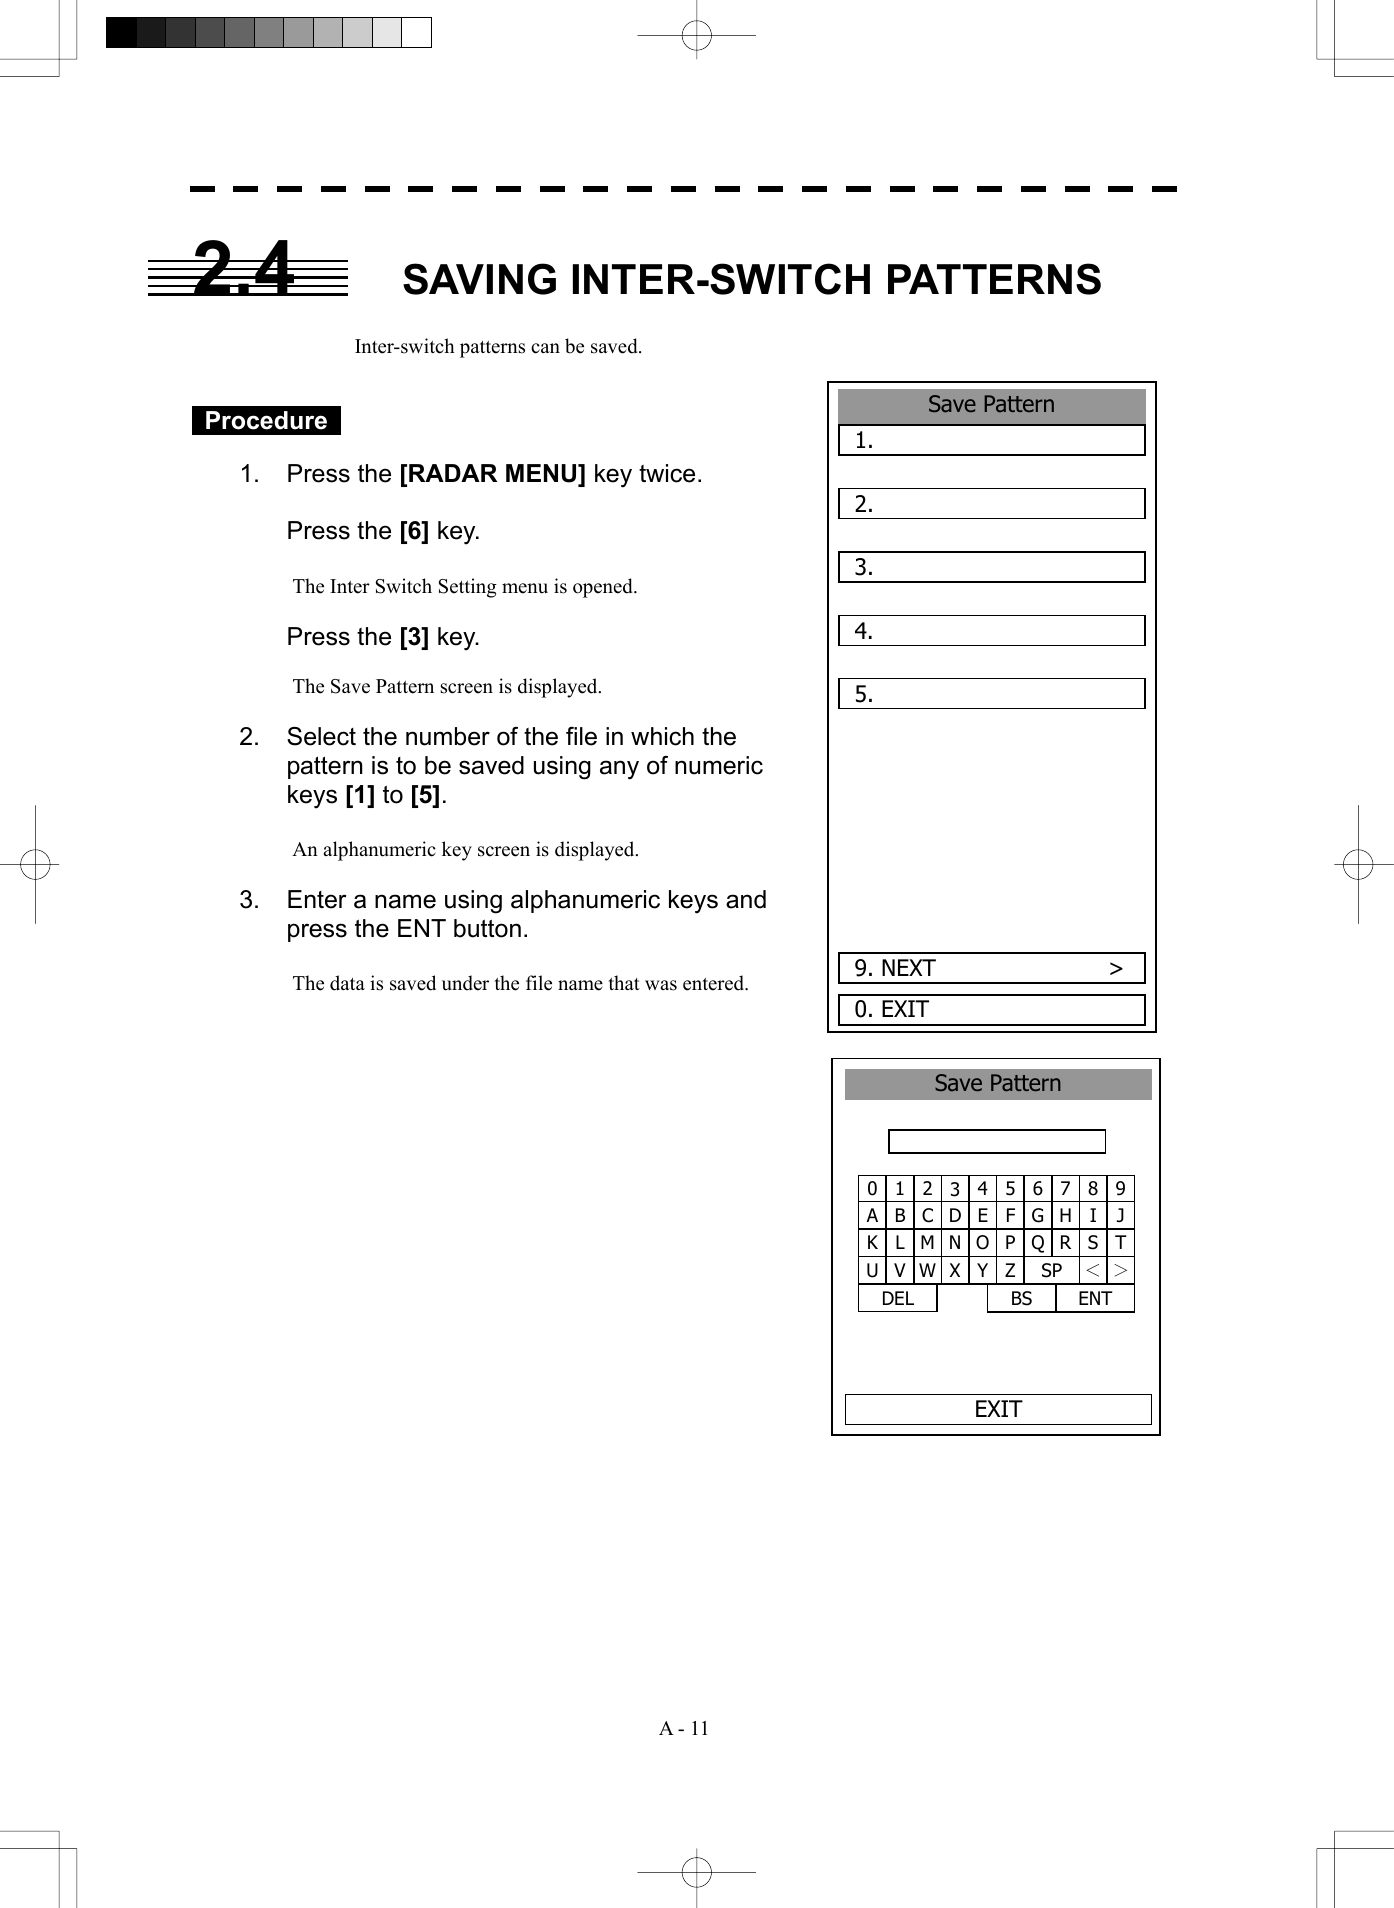  A - 11 2.4  SAVING INTER-SWITCH PATTERNS  Inter-switch patterns can be saved.    Procedure   1. Press the [RADAR MENU] key twice.   Press the [6] key.  The Inter Switch Setting menu is opened.   Press the [3] key.  The Save Pattern screen is displayed.  2.  Select the number of the file in which the pattern is to be saved using any of numeric keys [1] to [5].  An alphanumeric key screen is displayed.    3.  Enter a name using alphanumeric keys and press the ENT button.    The data is saved under the file name that was entered.                      9. NEXT               &gt;Save Pattern1.  2.  3.  4.  5.  0. EXIT 1 2 34 5 6 7 8 90 B C DE F G H I JA L M N O P Q R S TK V W X Y Z SP ＜ ＞U DEL  ENT BS Save PatternEXIT